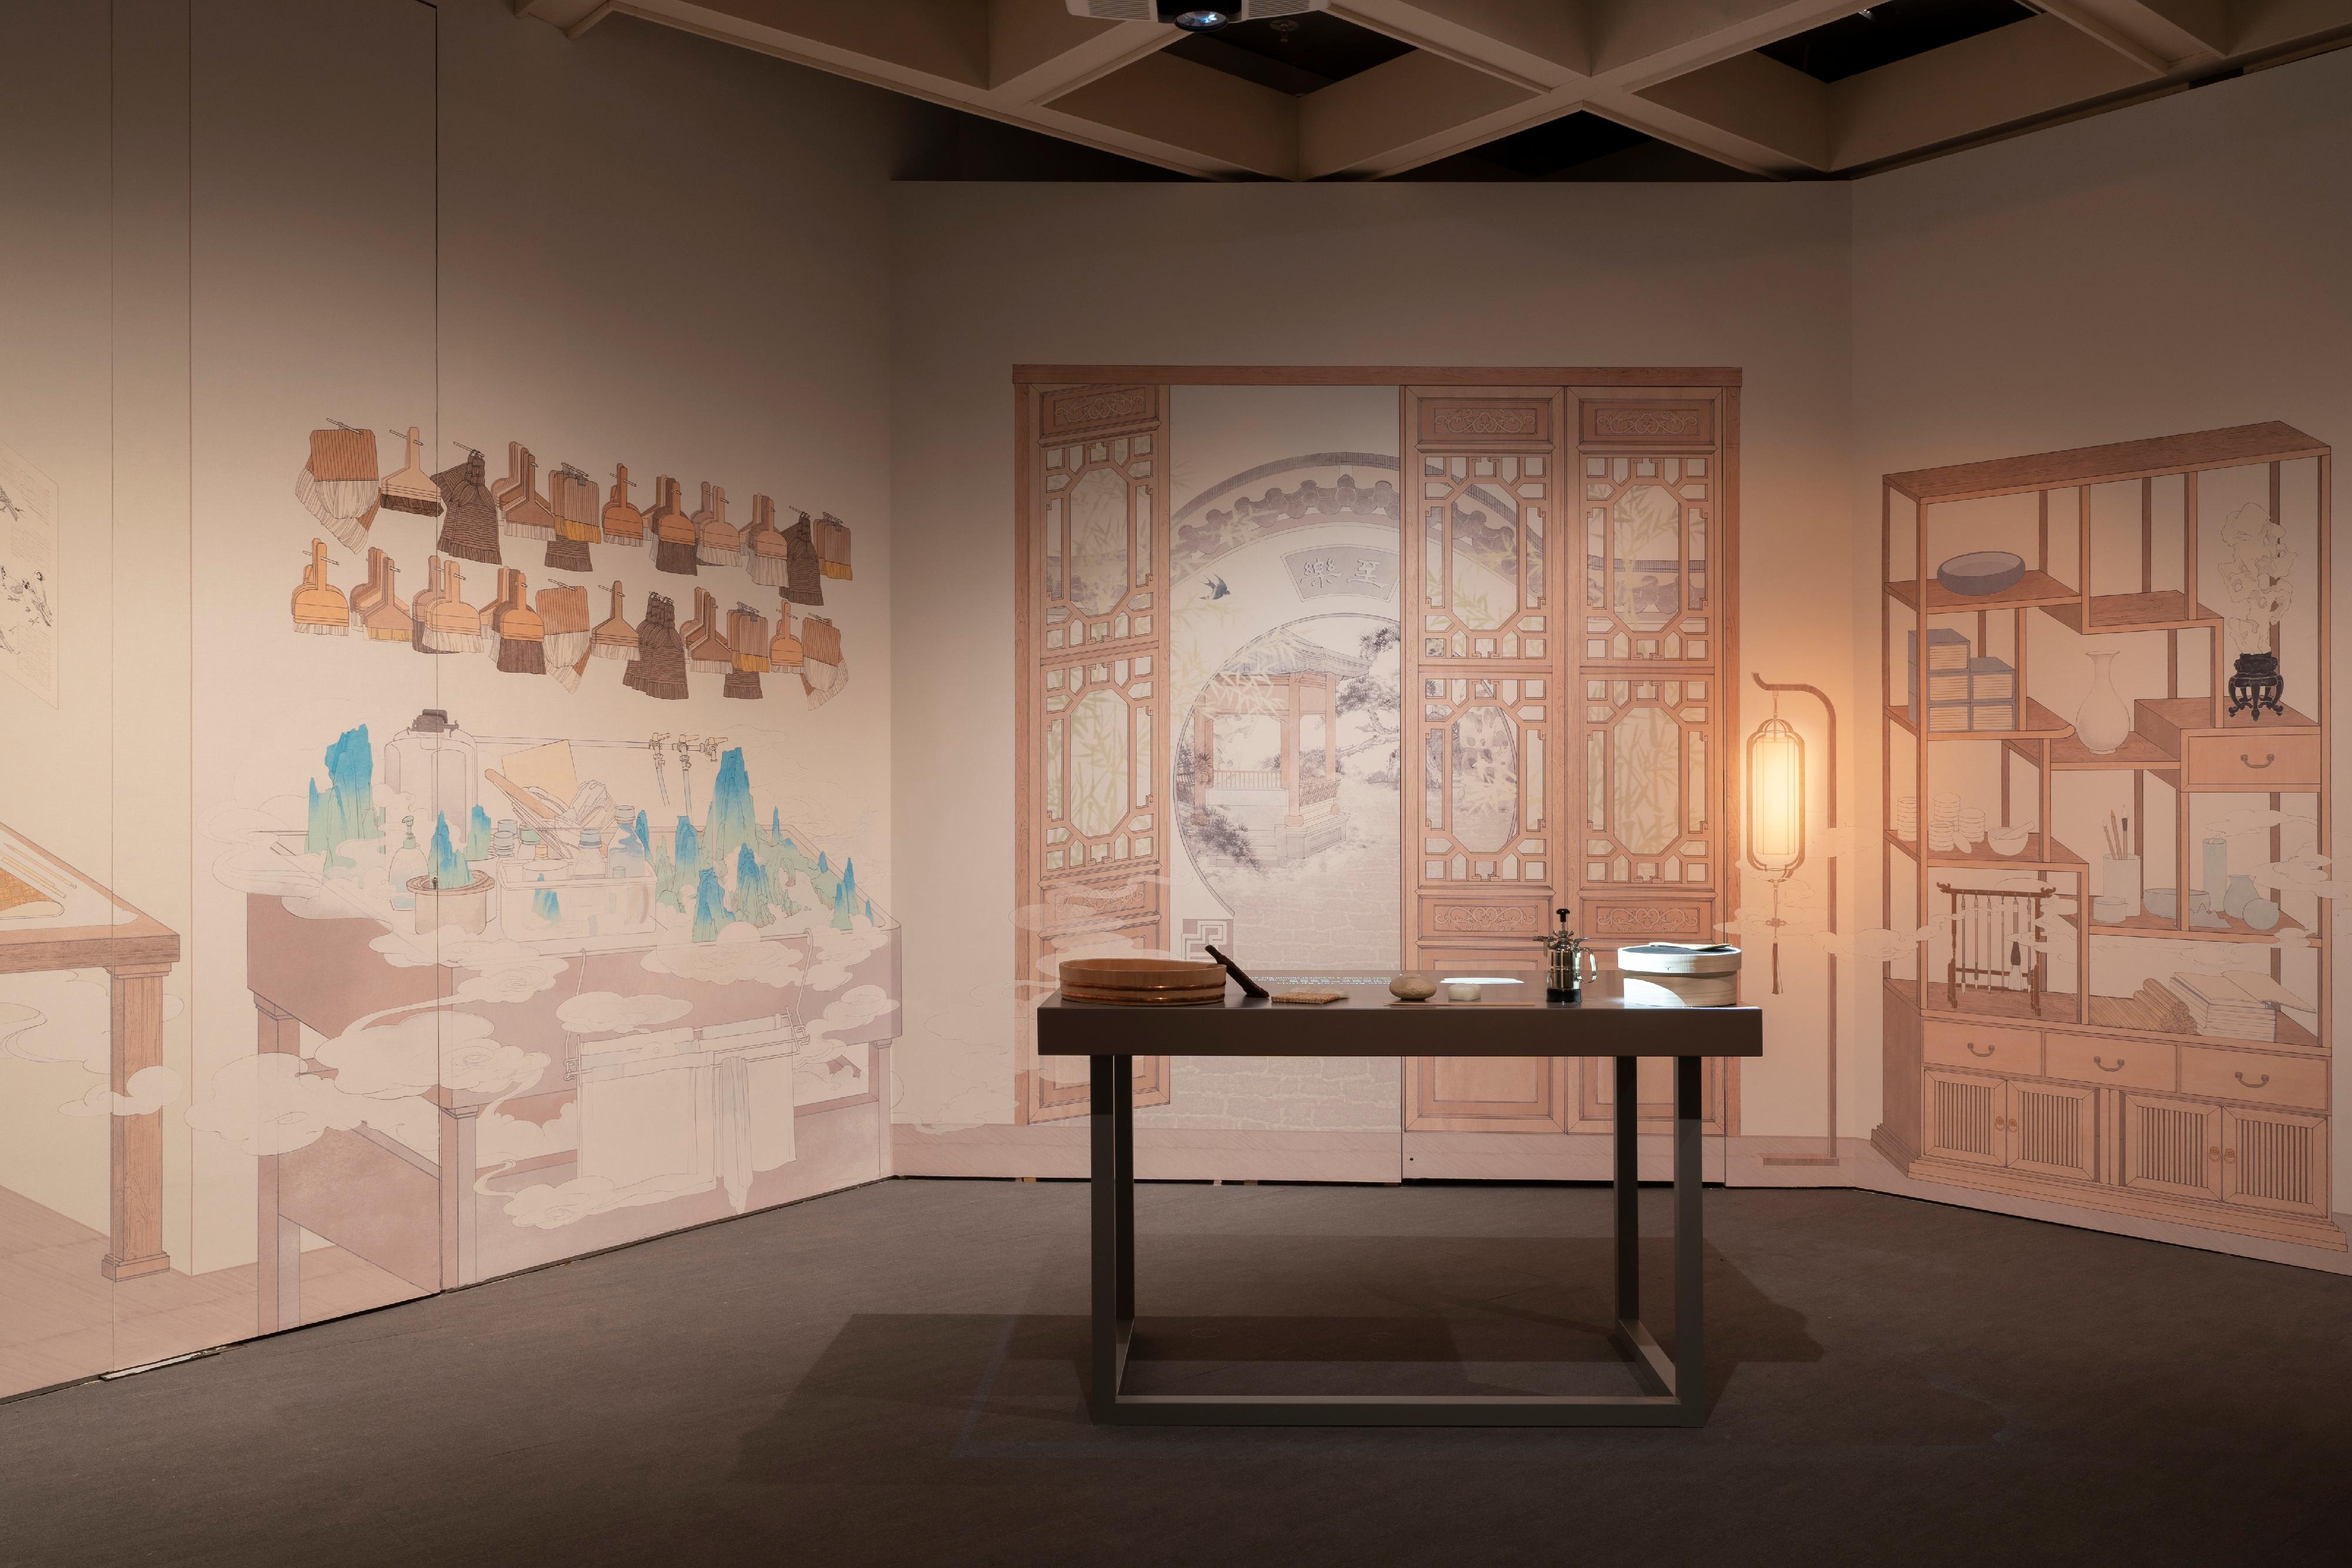 The Hong Kong Museum of Art (HKMoA) has organised the "Seeing Art Anew: Mounting and Conservation of Chinese Painting and Calligraphy", which explores Chinese paintings and calligraphy from artistic and scientific perspectives, providing the public with insights into the conservation work behind the scenes of a museum. The exhibition was opened to the public today (March 22) at the HKMoA.